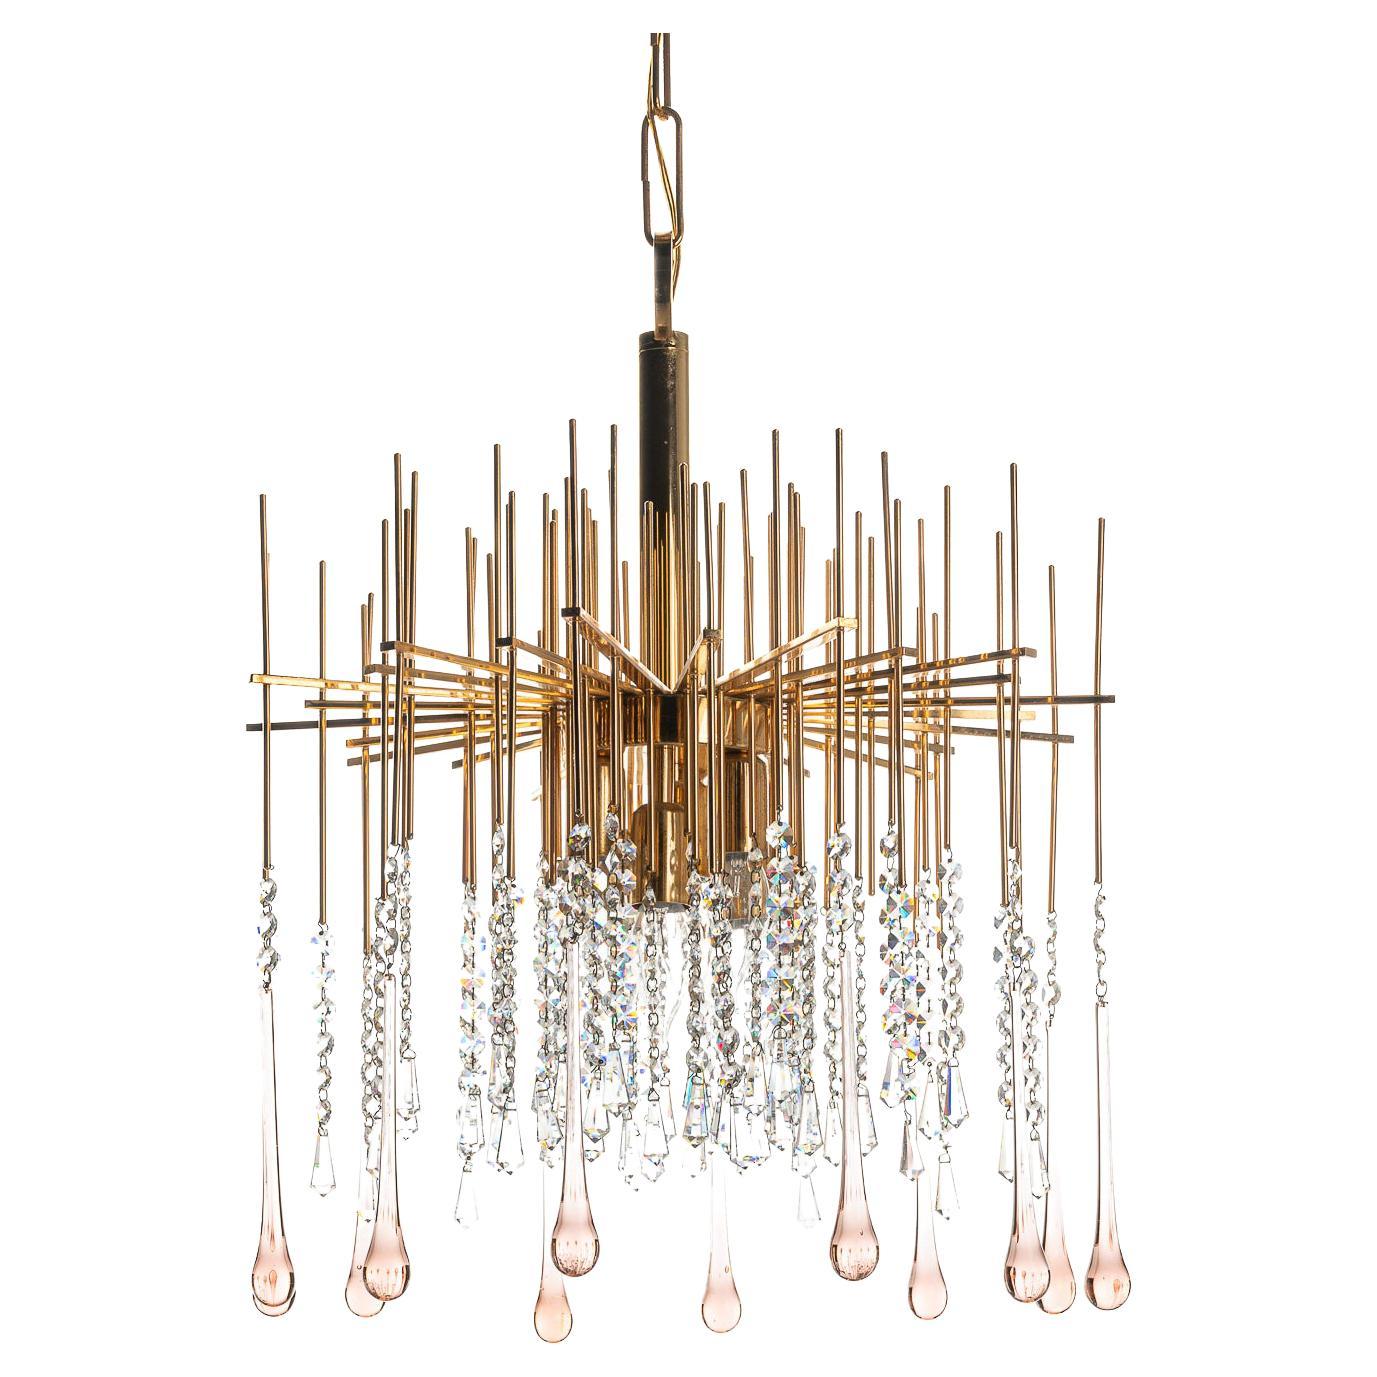 1950's Brass and Crystal Glass Chandelier Attributed to Palwa